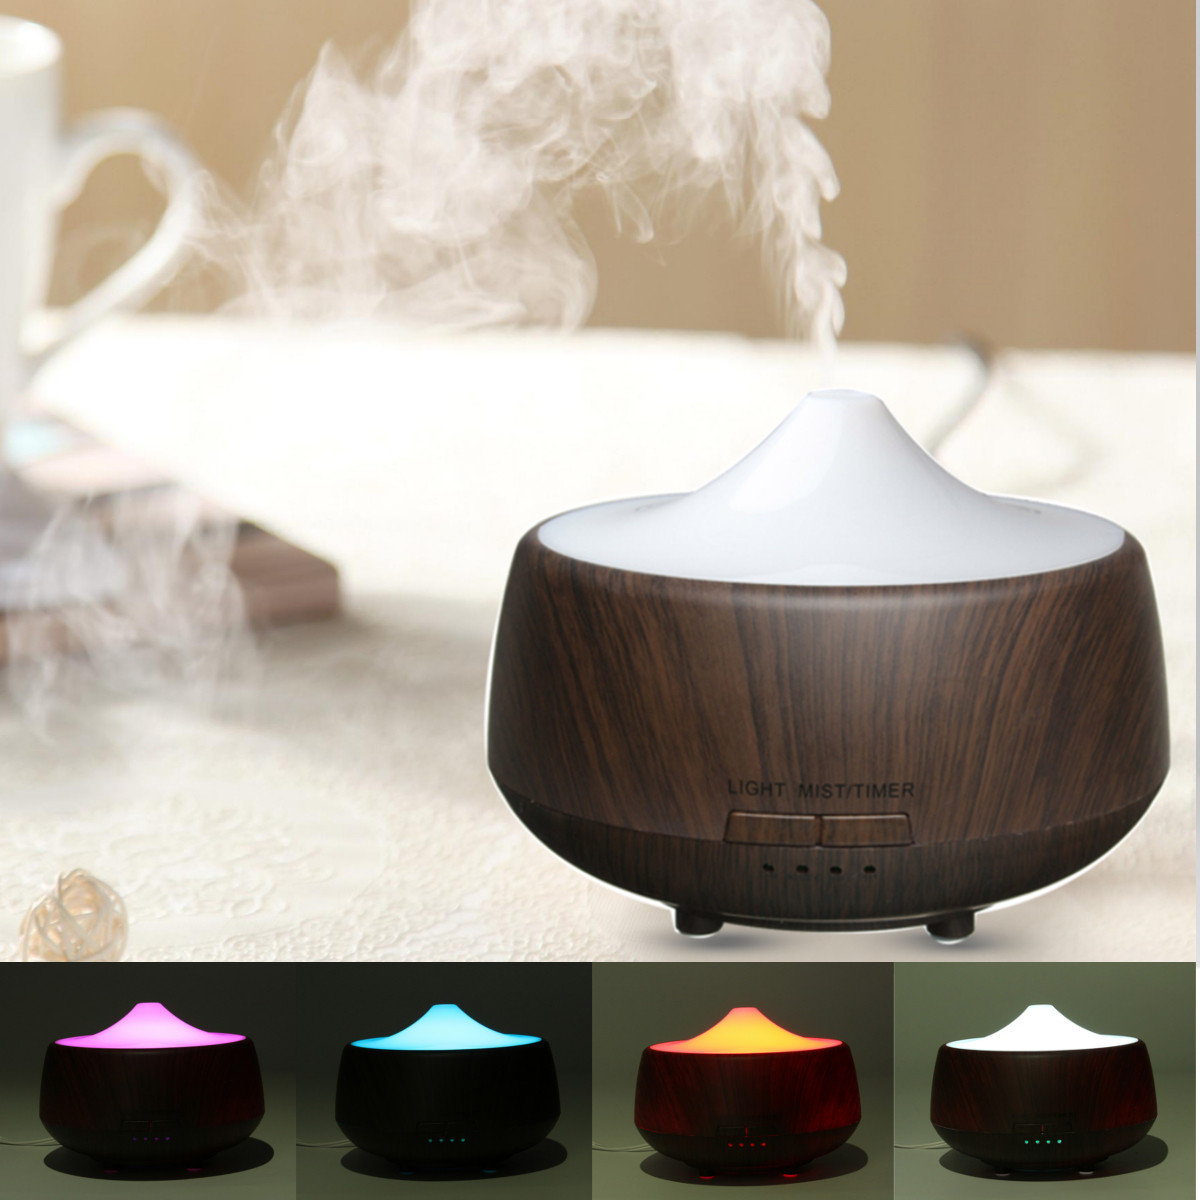 

Ultrasonic LED Color-changing Humidifier Dark Wood Grain Diffuser Aromatherapy Spa Essential Oil, White